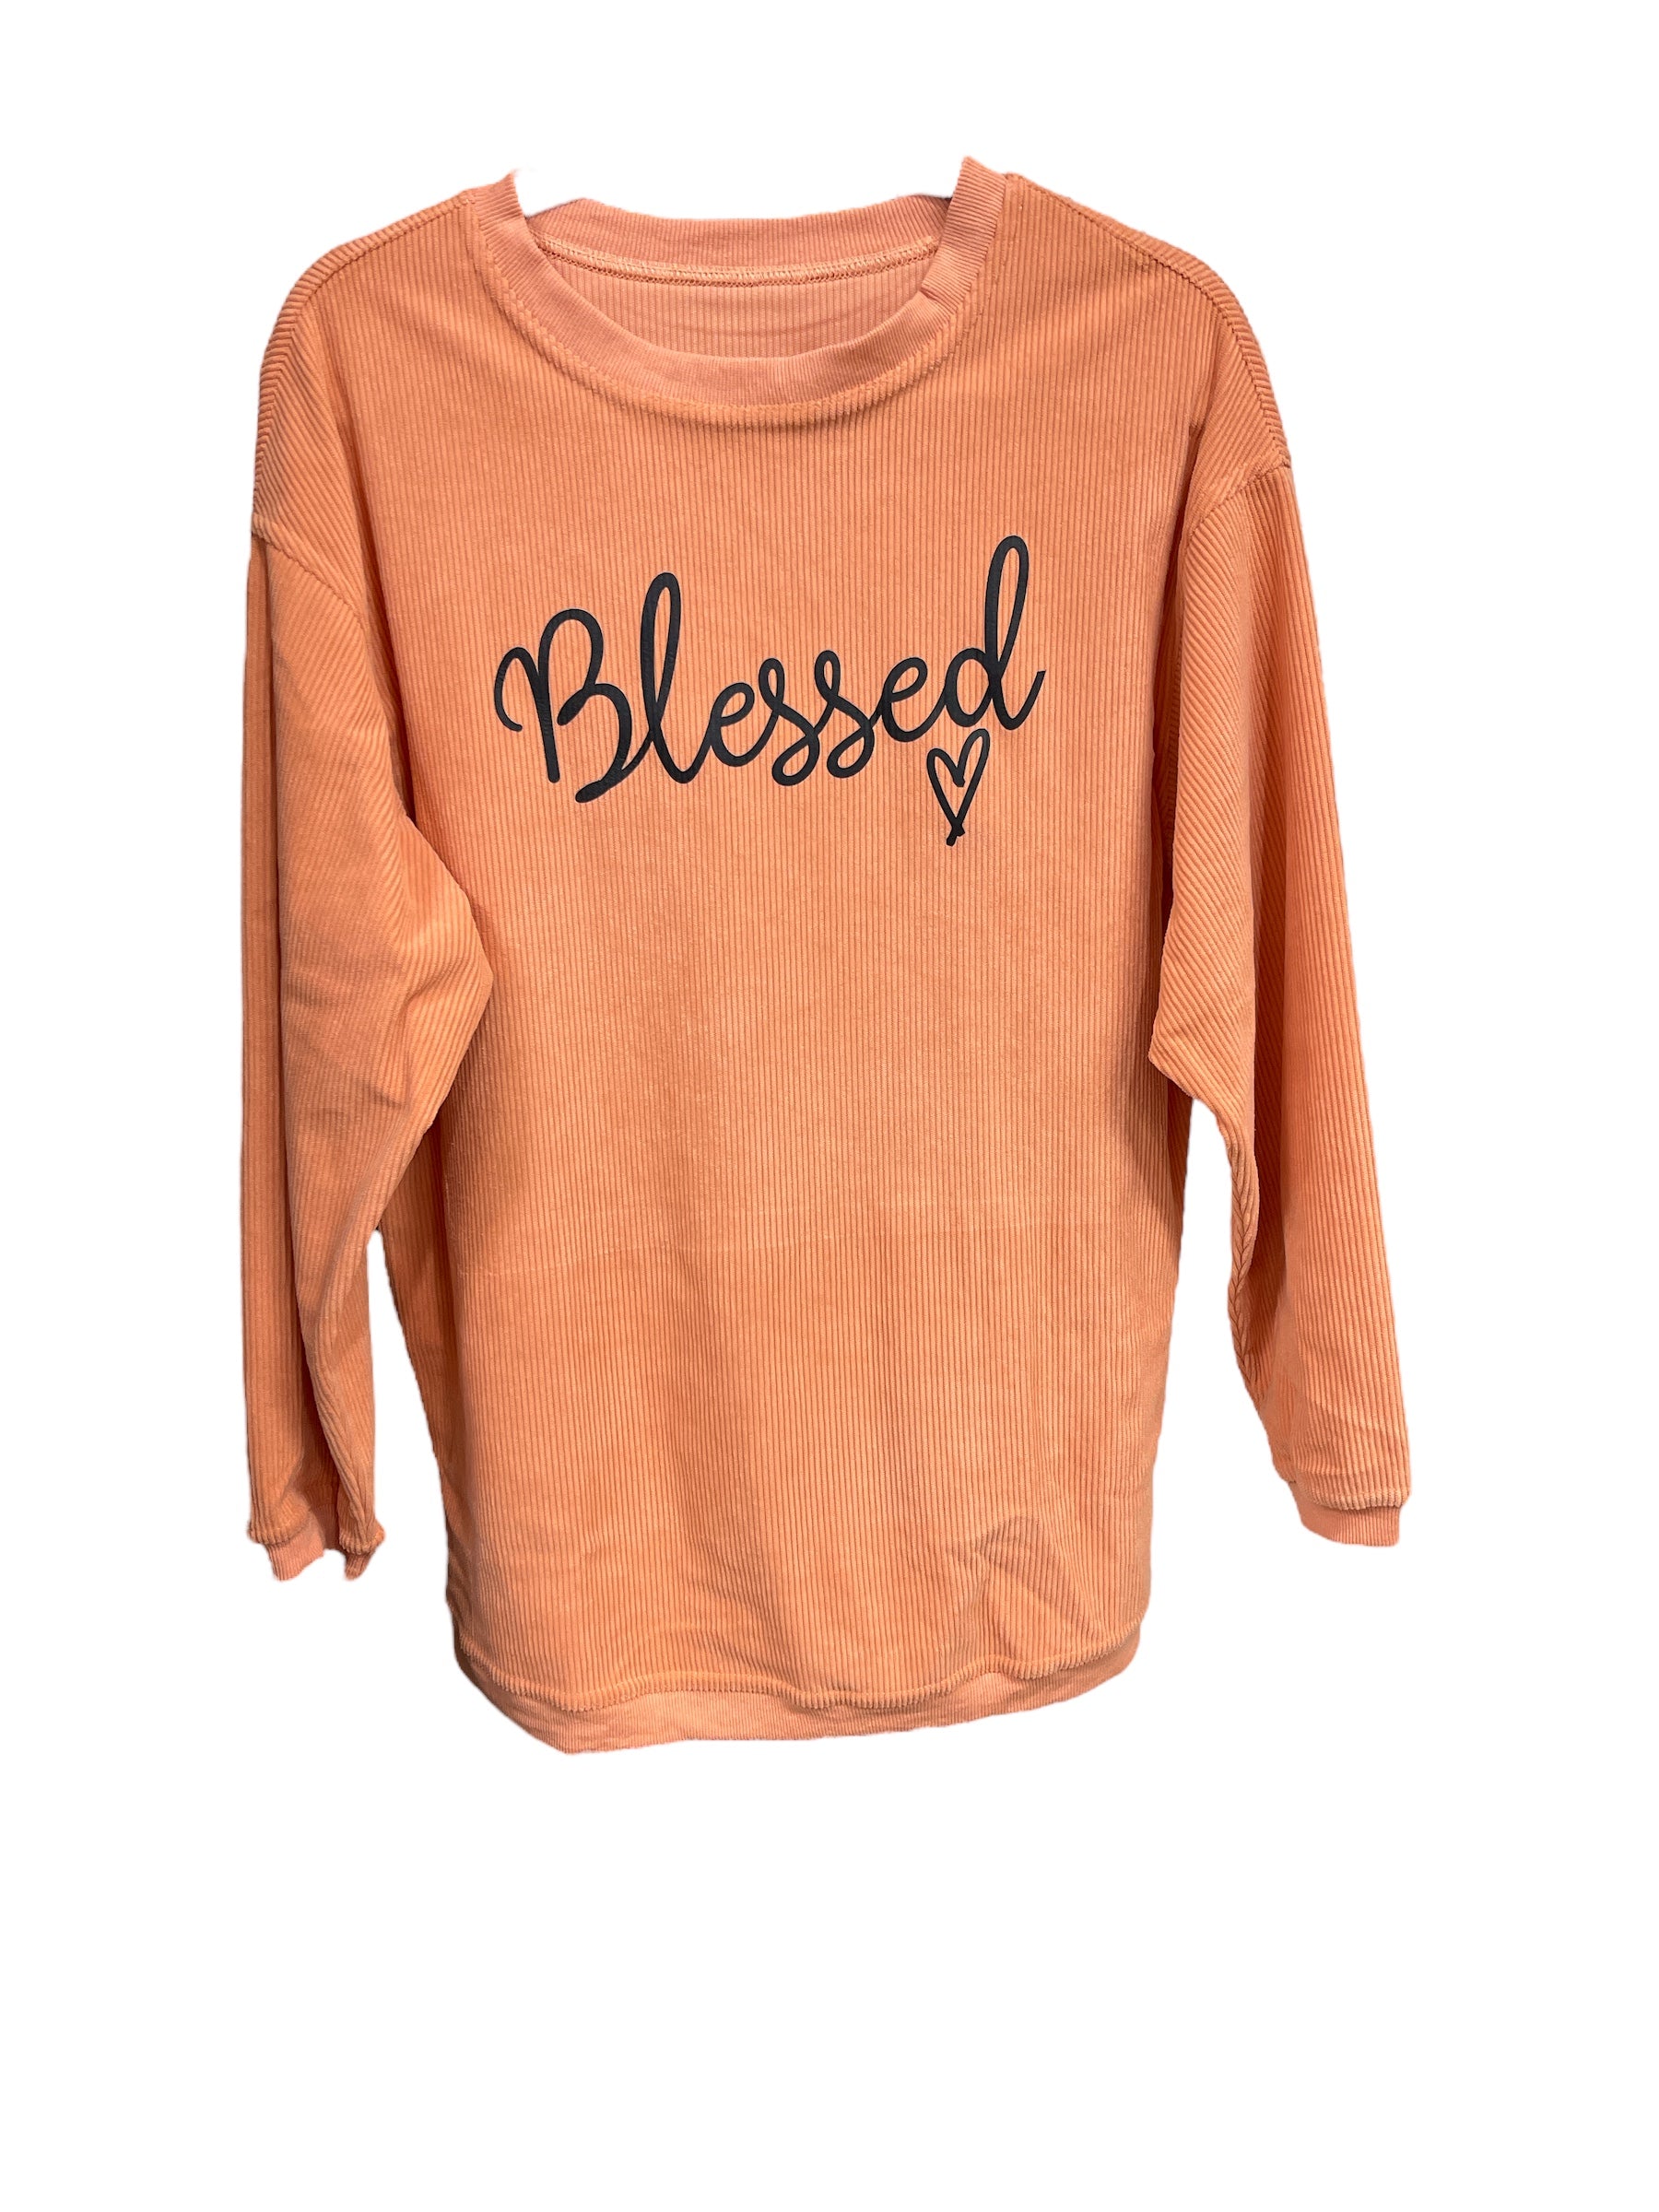 Ribbed "Blessed" Long Sleeve Top